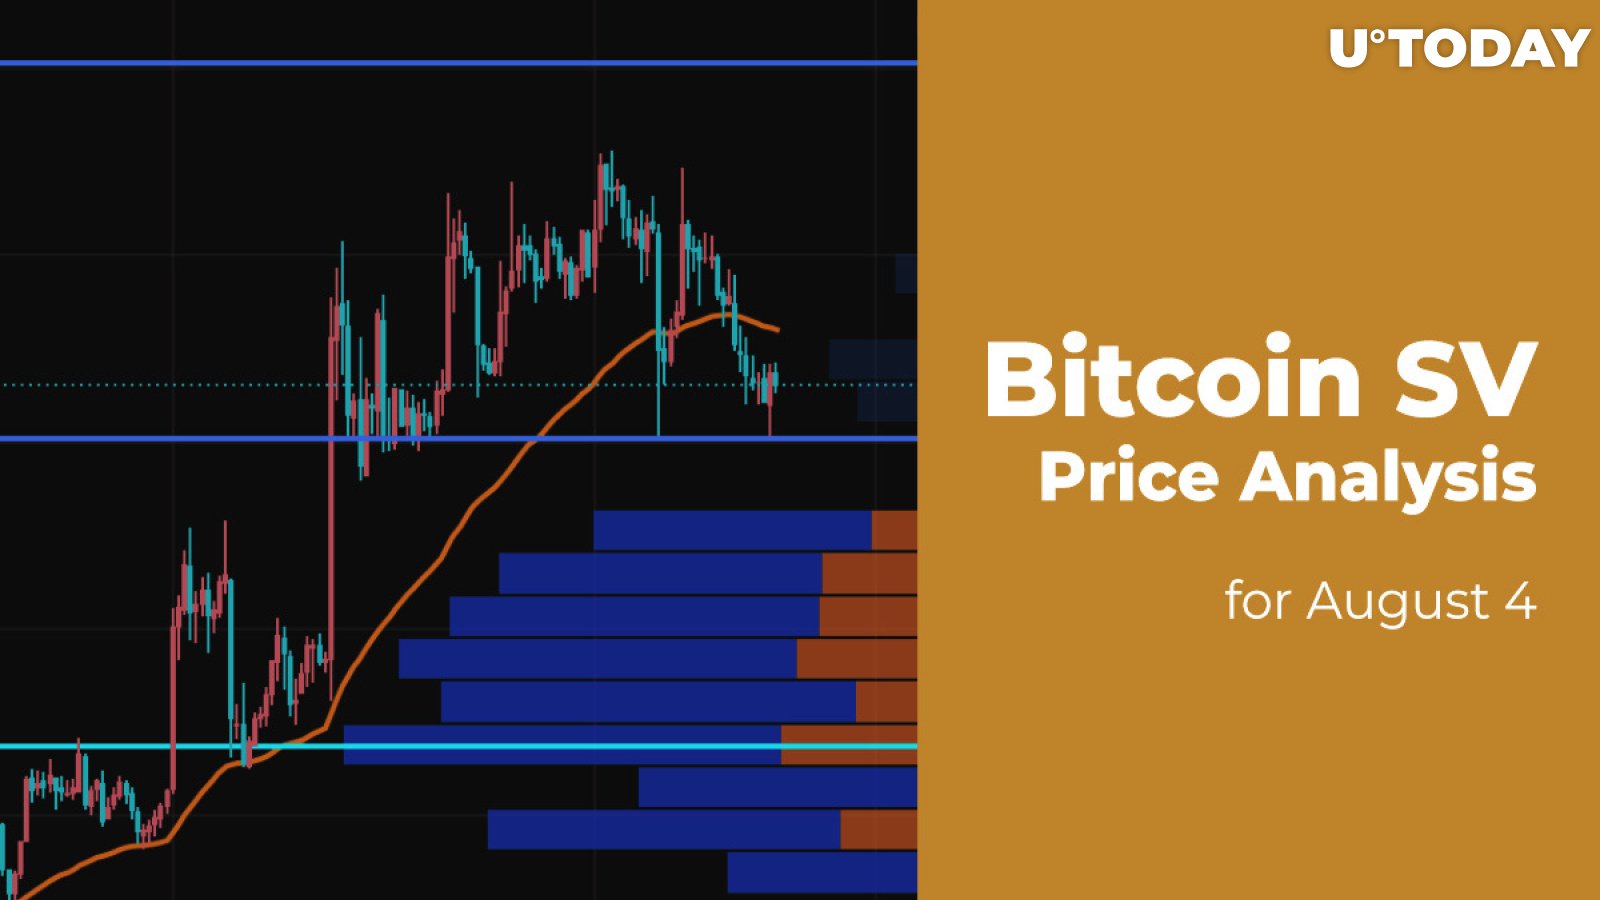 Bitcoin SV (BSV) Price Analysis for August 4